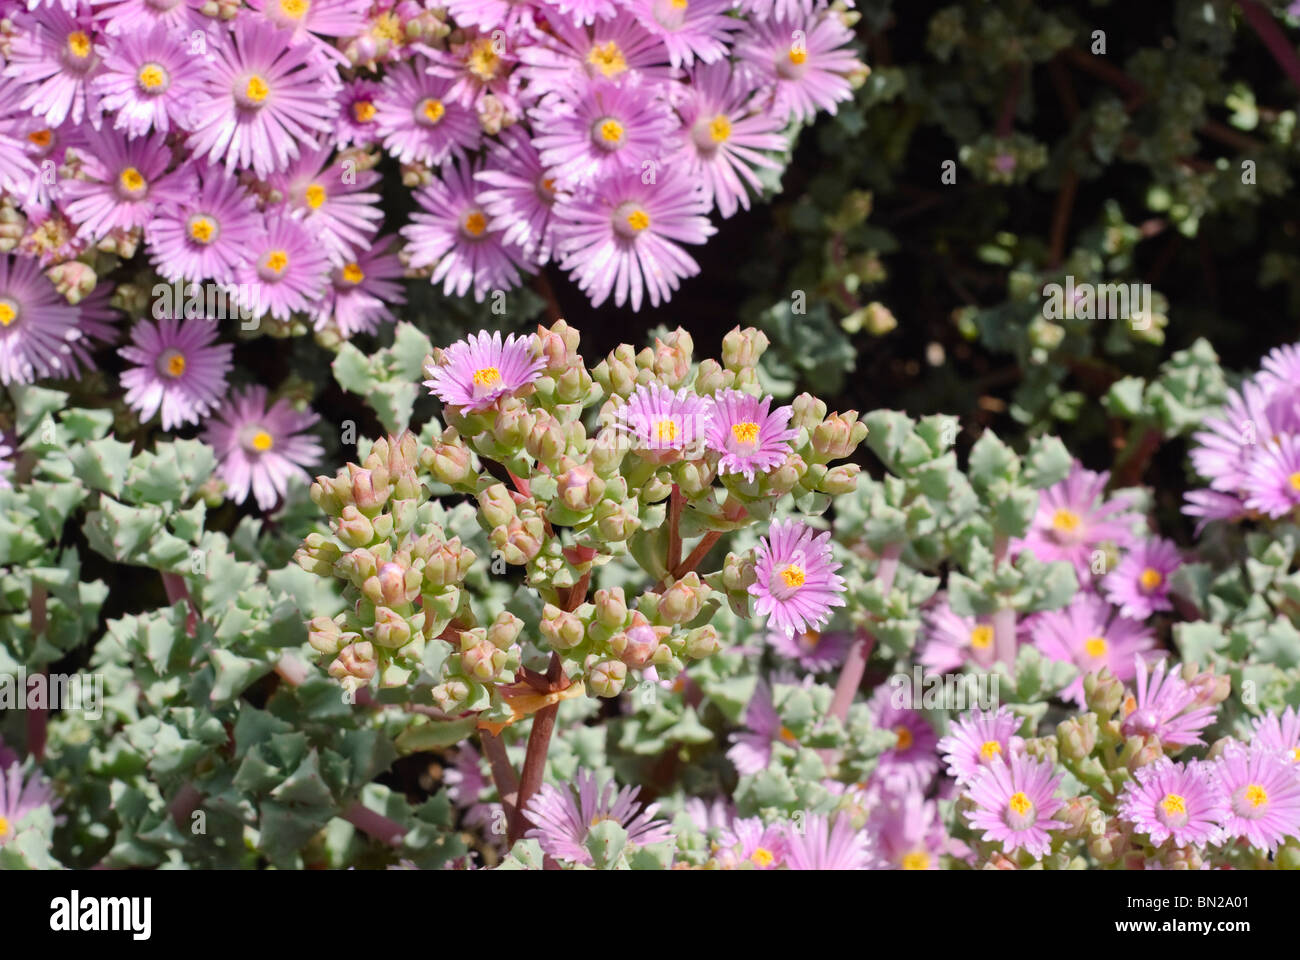 Lampranthus piquetbergensis, is an ice plant succulent in the family Aizoaceae. Spectacularly colorful blooms cover the plant. Stock Photo